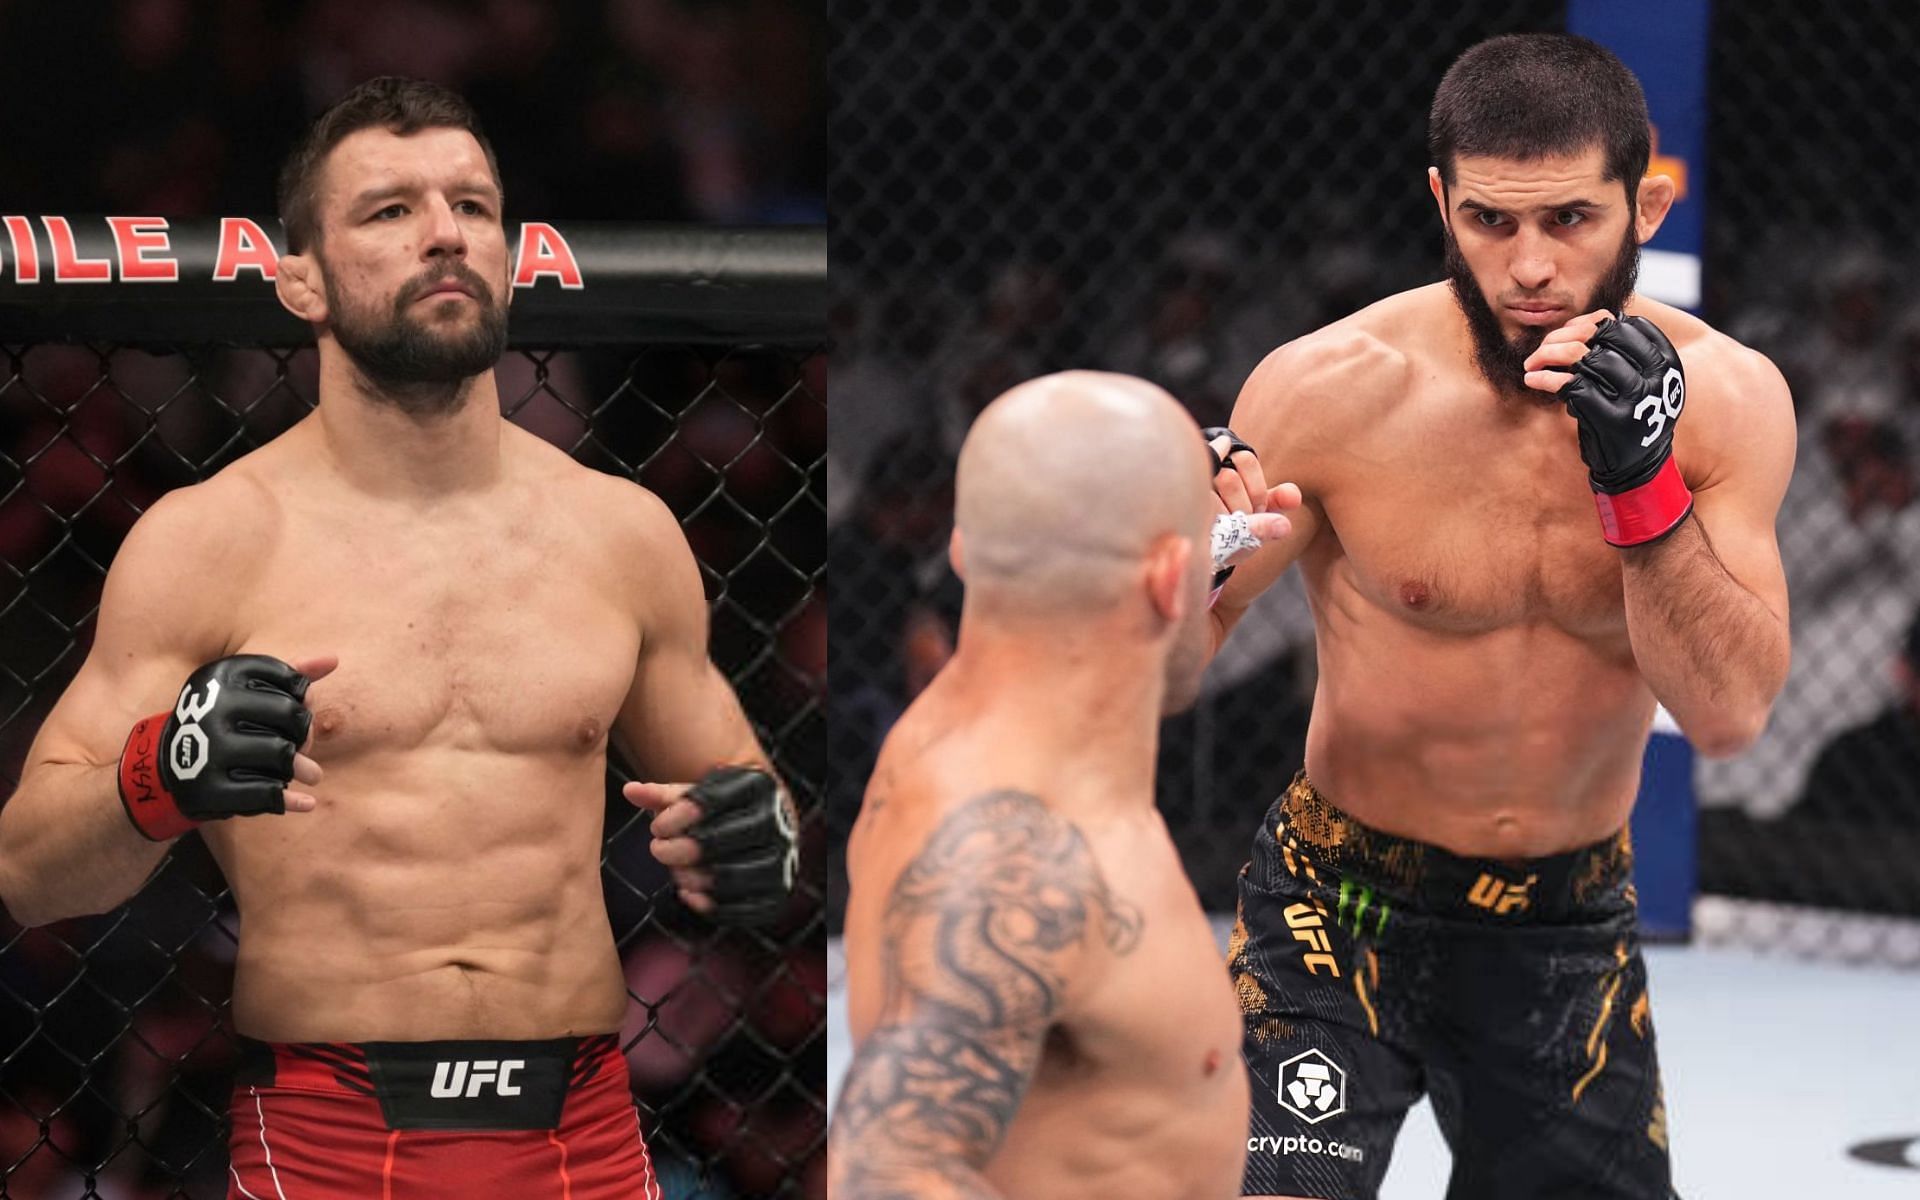 Mateusz Gamrot (left) and Islam Makhachev vs. Alexander Volkanovski at UFC 294 (right) [Images Courtesy: @GettyImages]